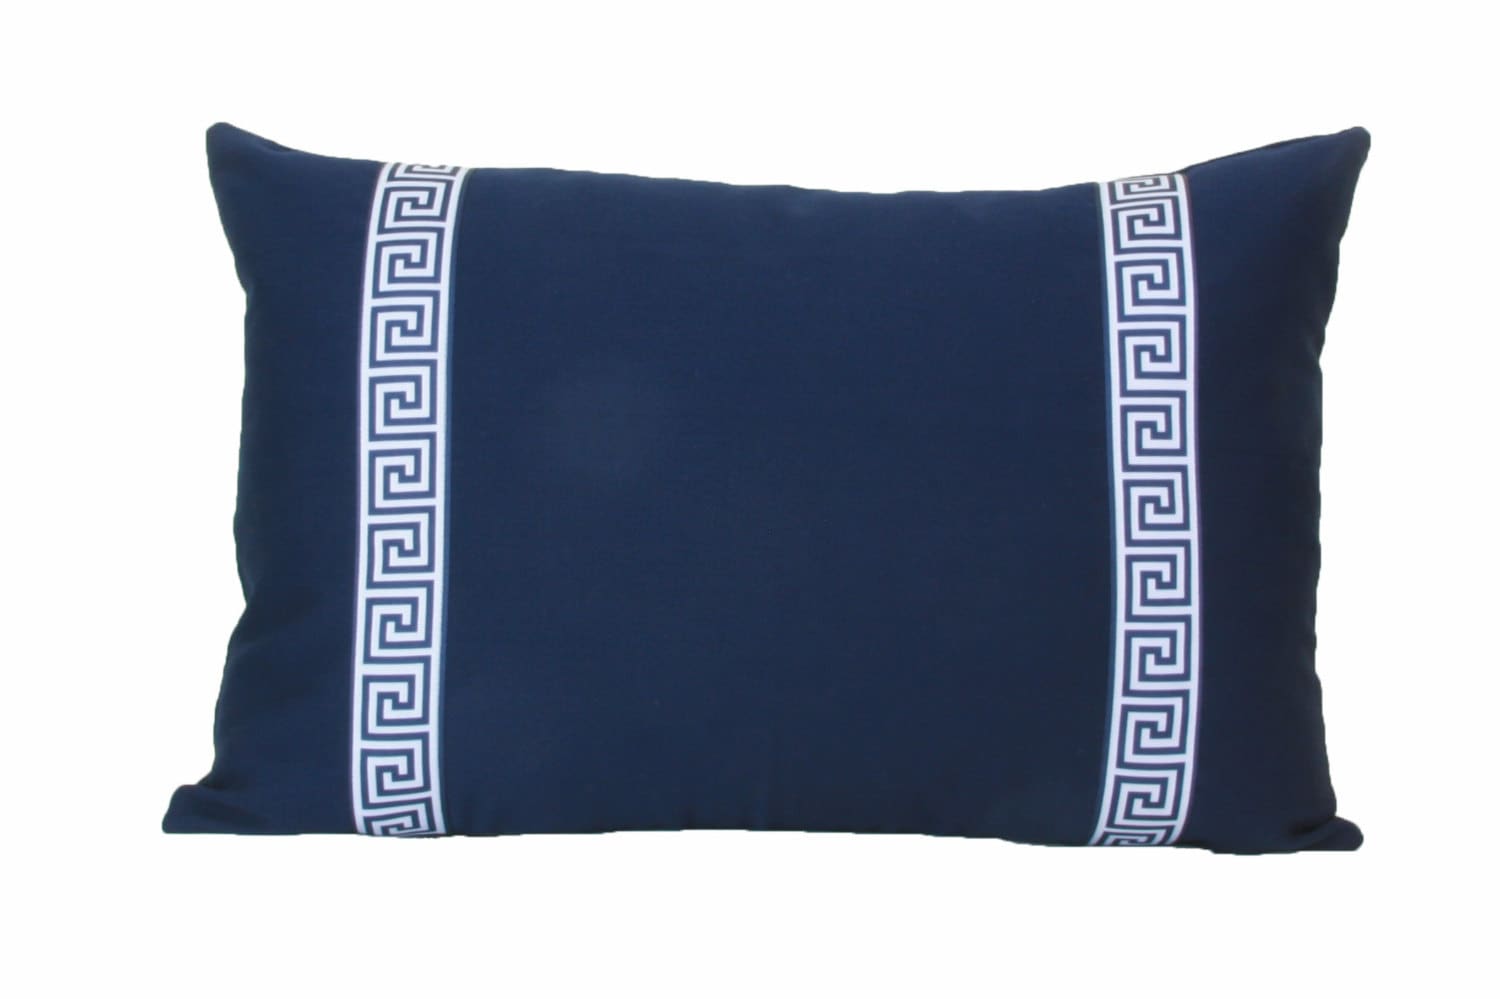 Navy Blue Greek Key Sofa for Couch 18x18 or Bed Hofdeco Coastal Decorative Throw Pillow Cover ONLY 